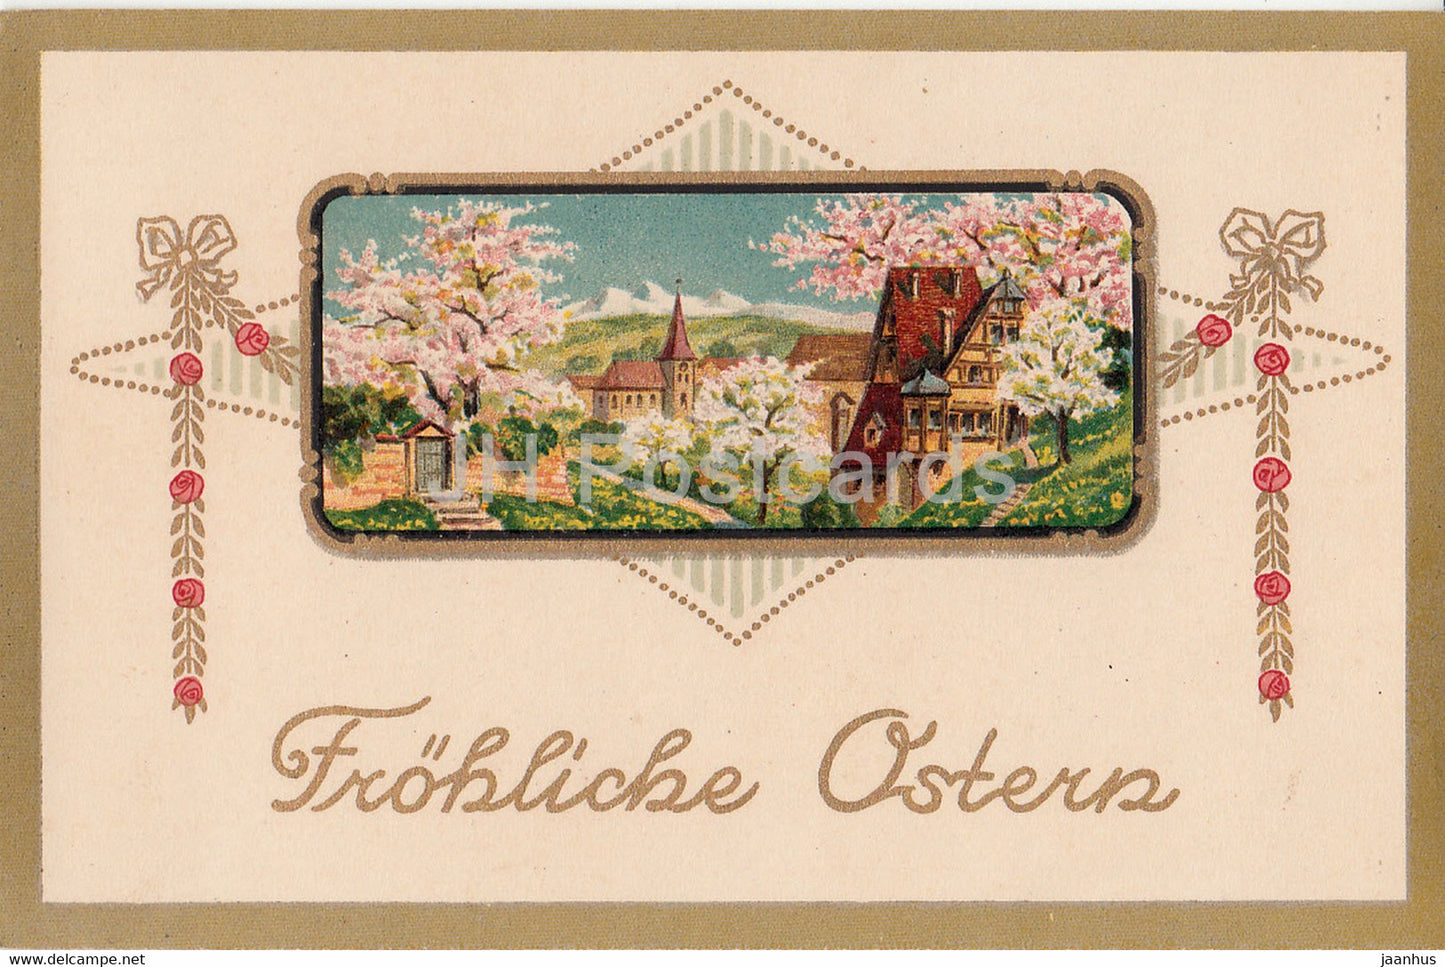 Easter Greeting Card - Frohliche Ostern - town view - Grossor - old postcard - Switzerland - unused - JH Postcards